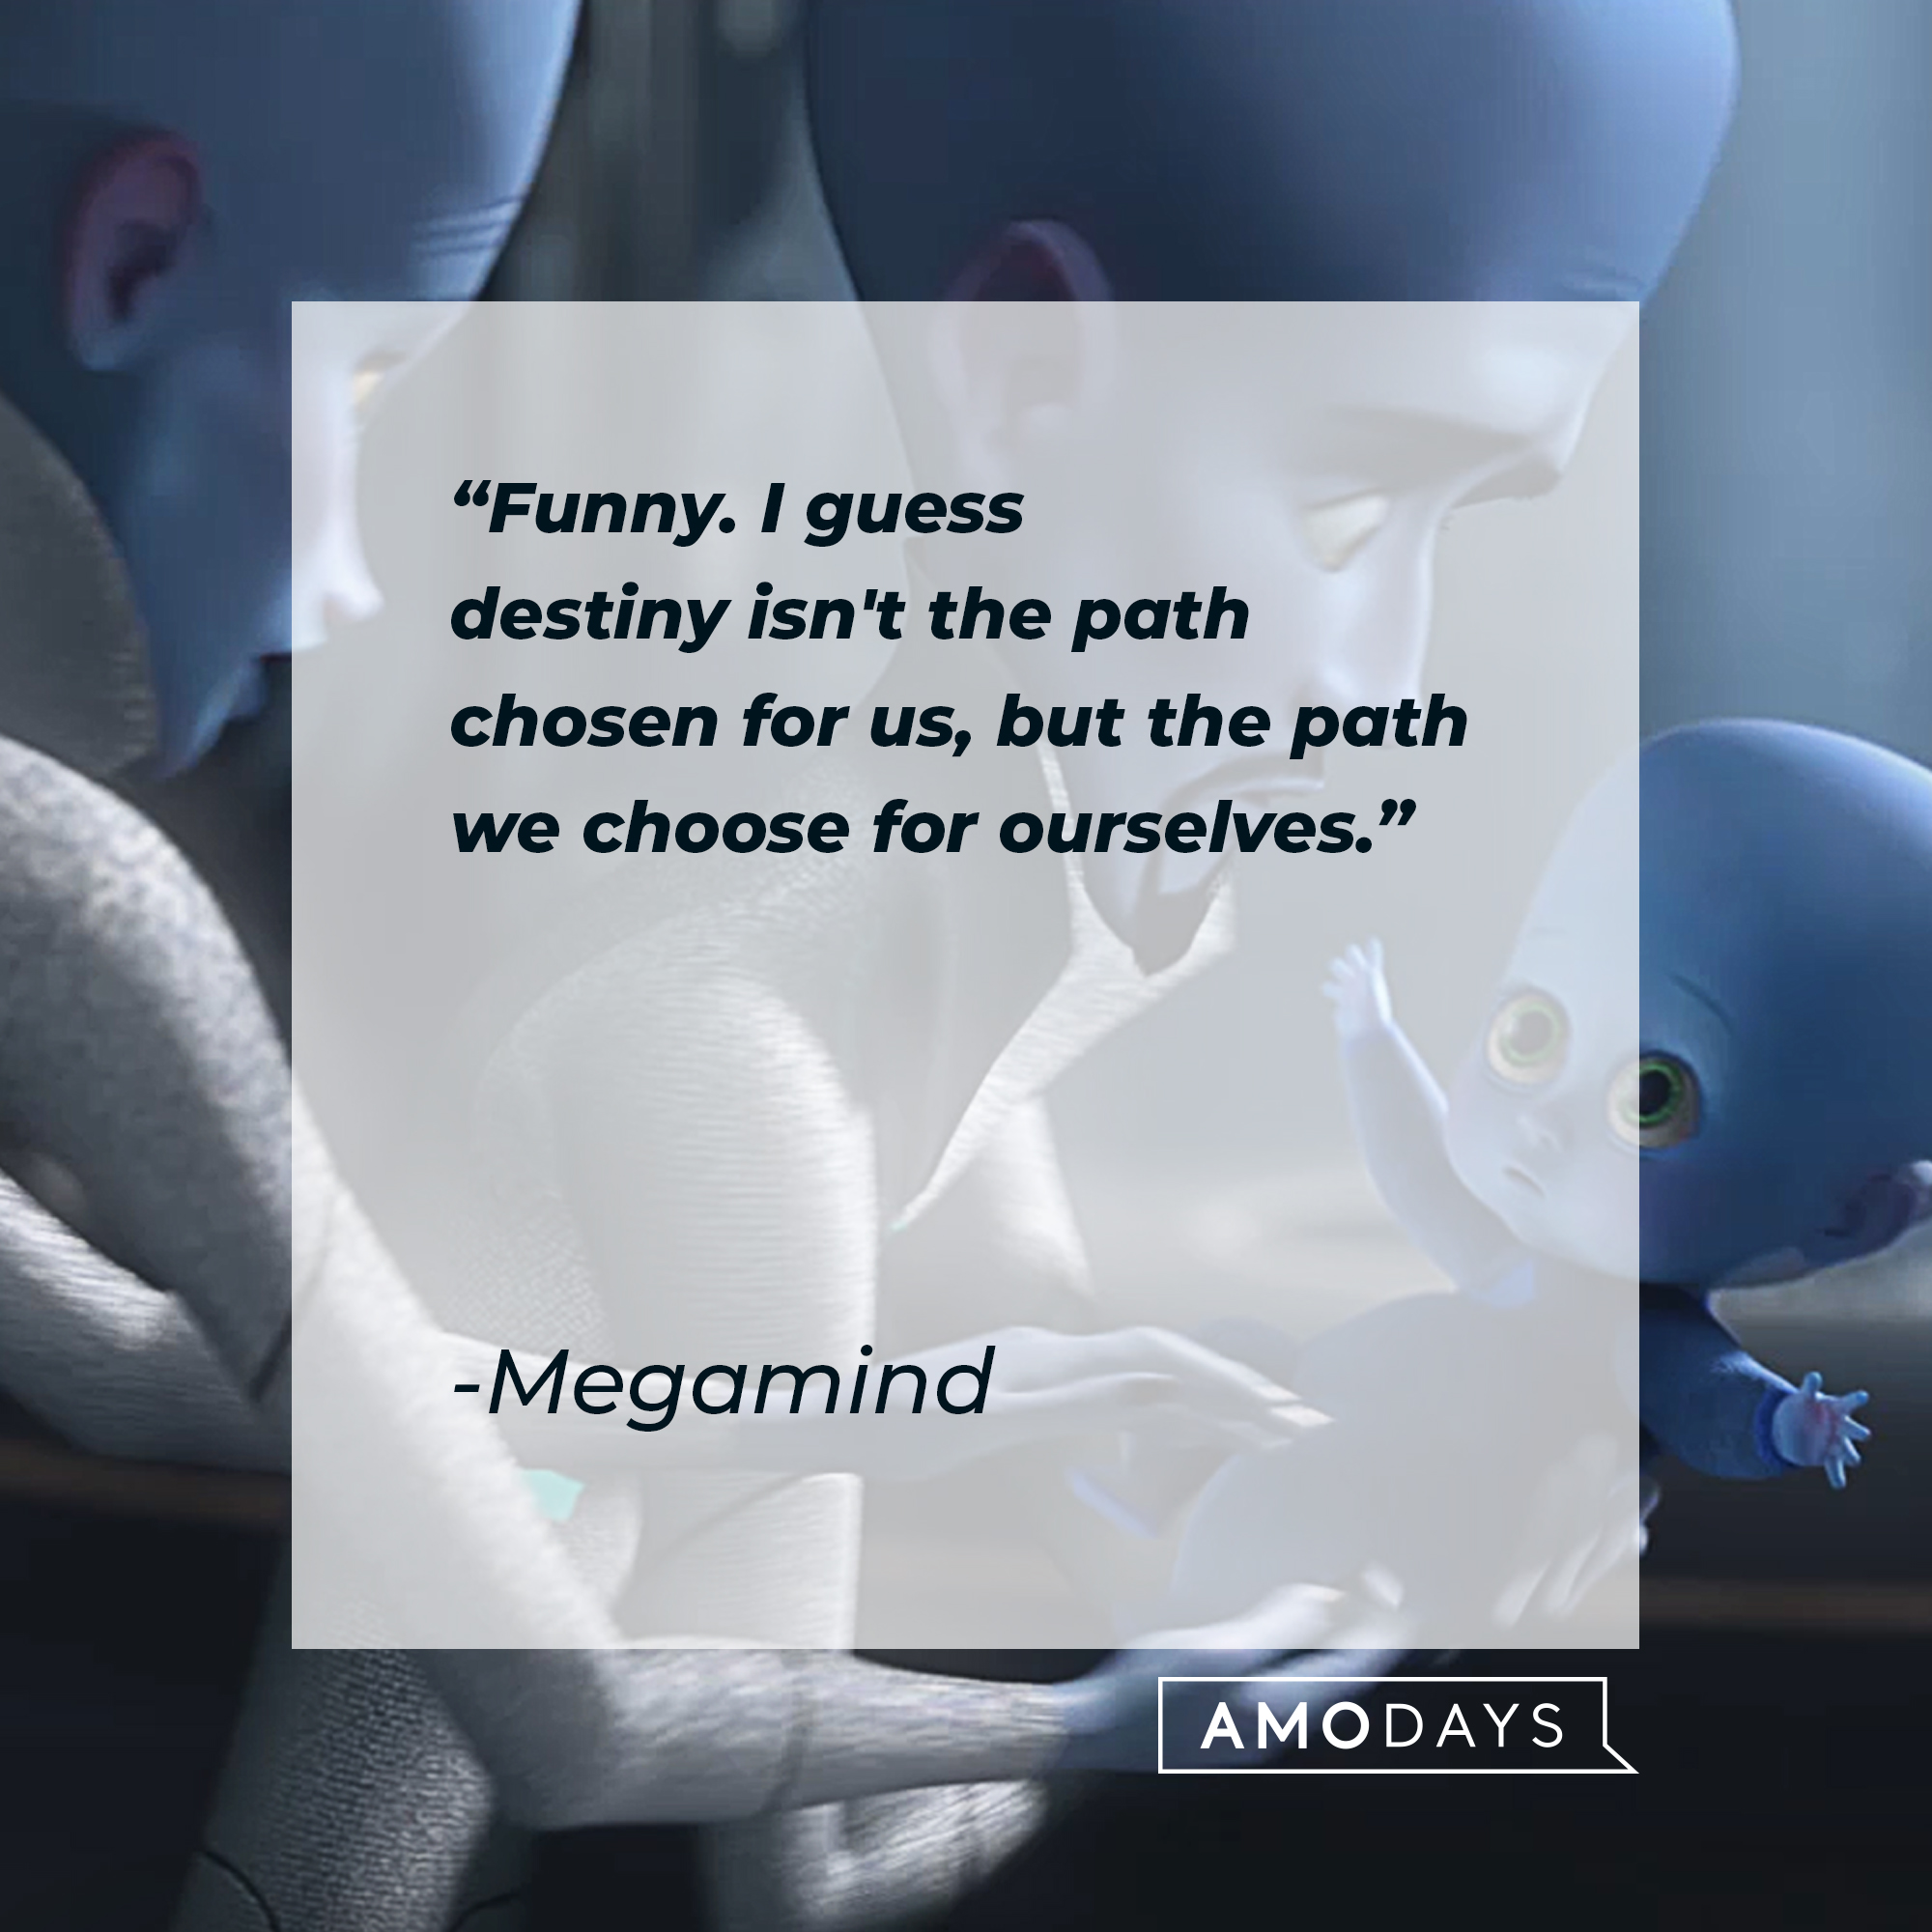 Megamind's quote: "Funny. I guess destiny isn't the path chosen for us, but the path we choose for ourselves." | Source: Facebook.com/MegamindUK